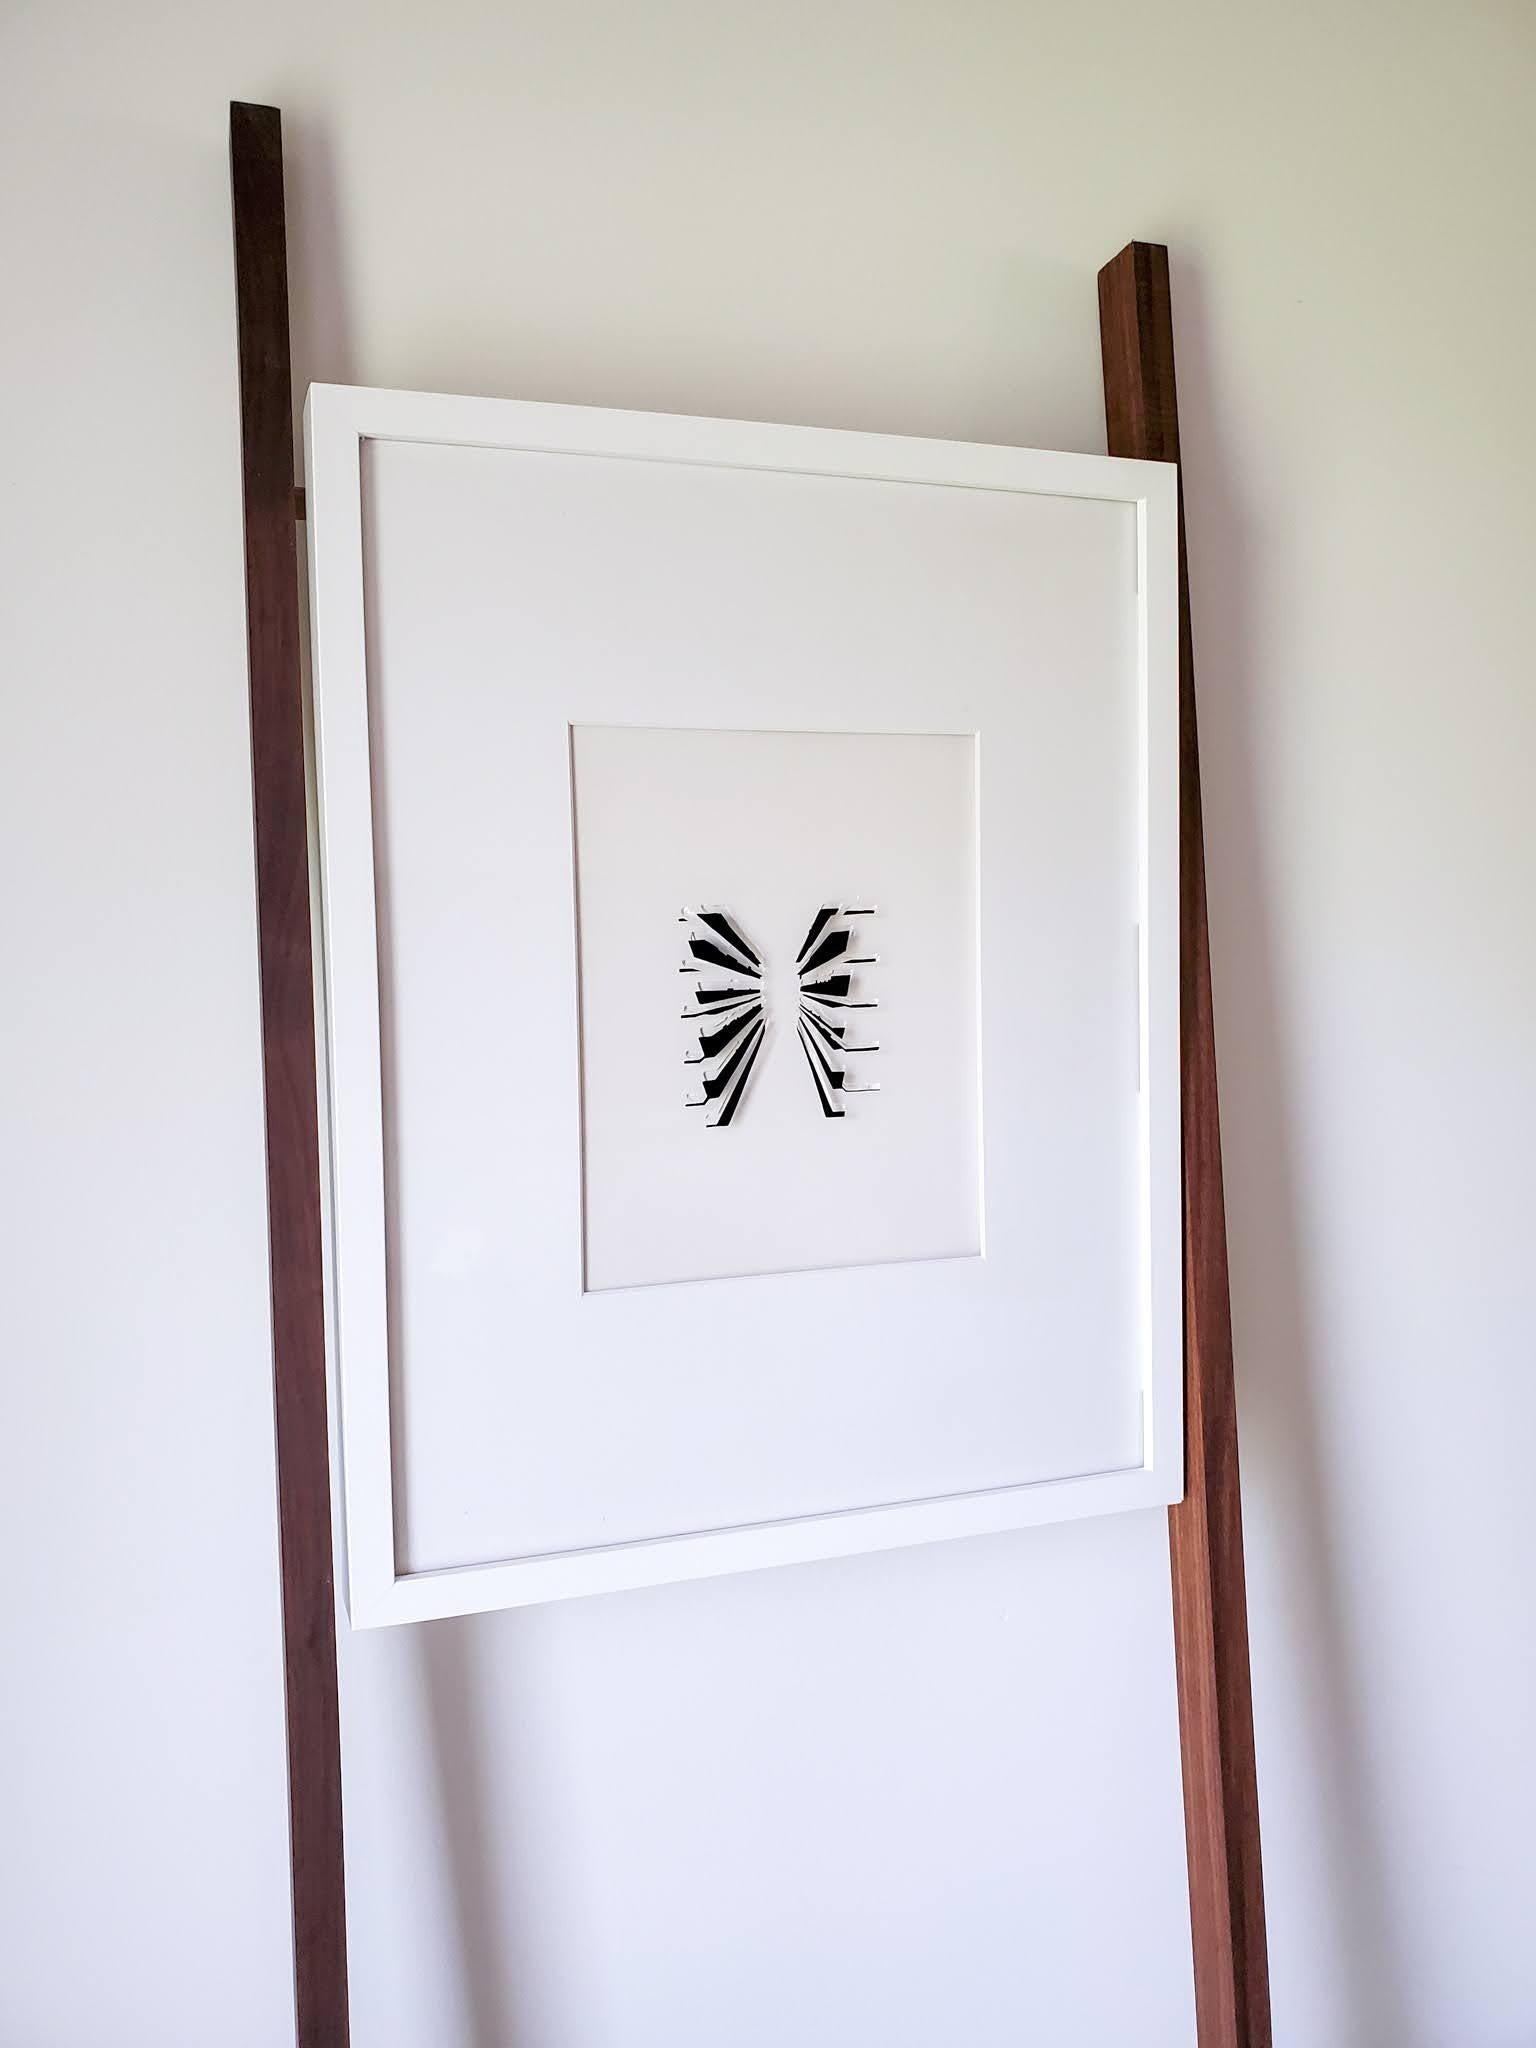 Imprints / I Am Yourself: Wood.  Art wall abstract sculpture installation - Contemporary Mixed Media Art by Casey Waterman